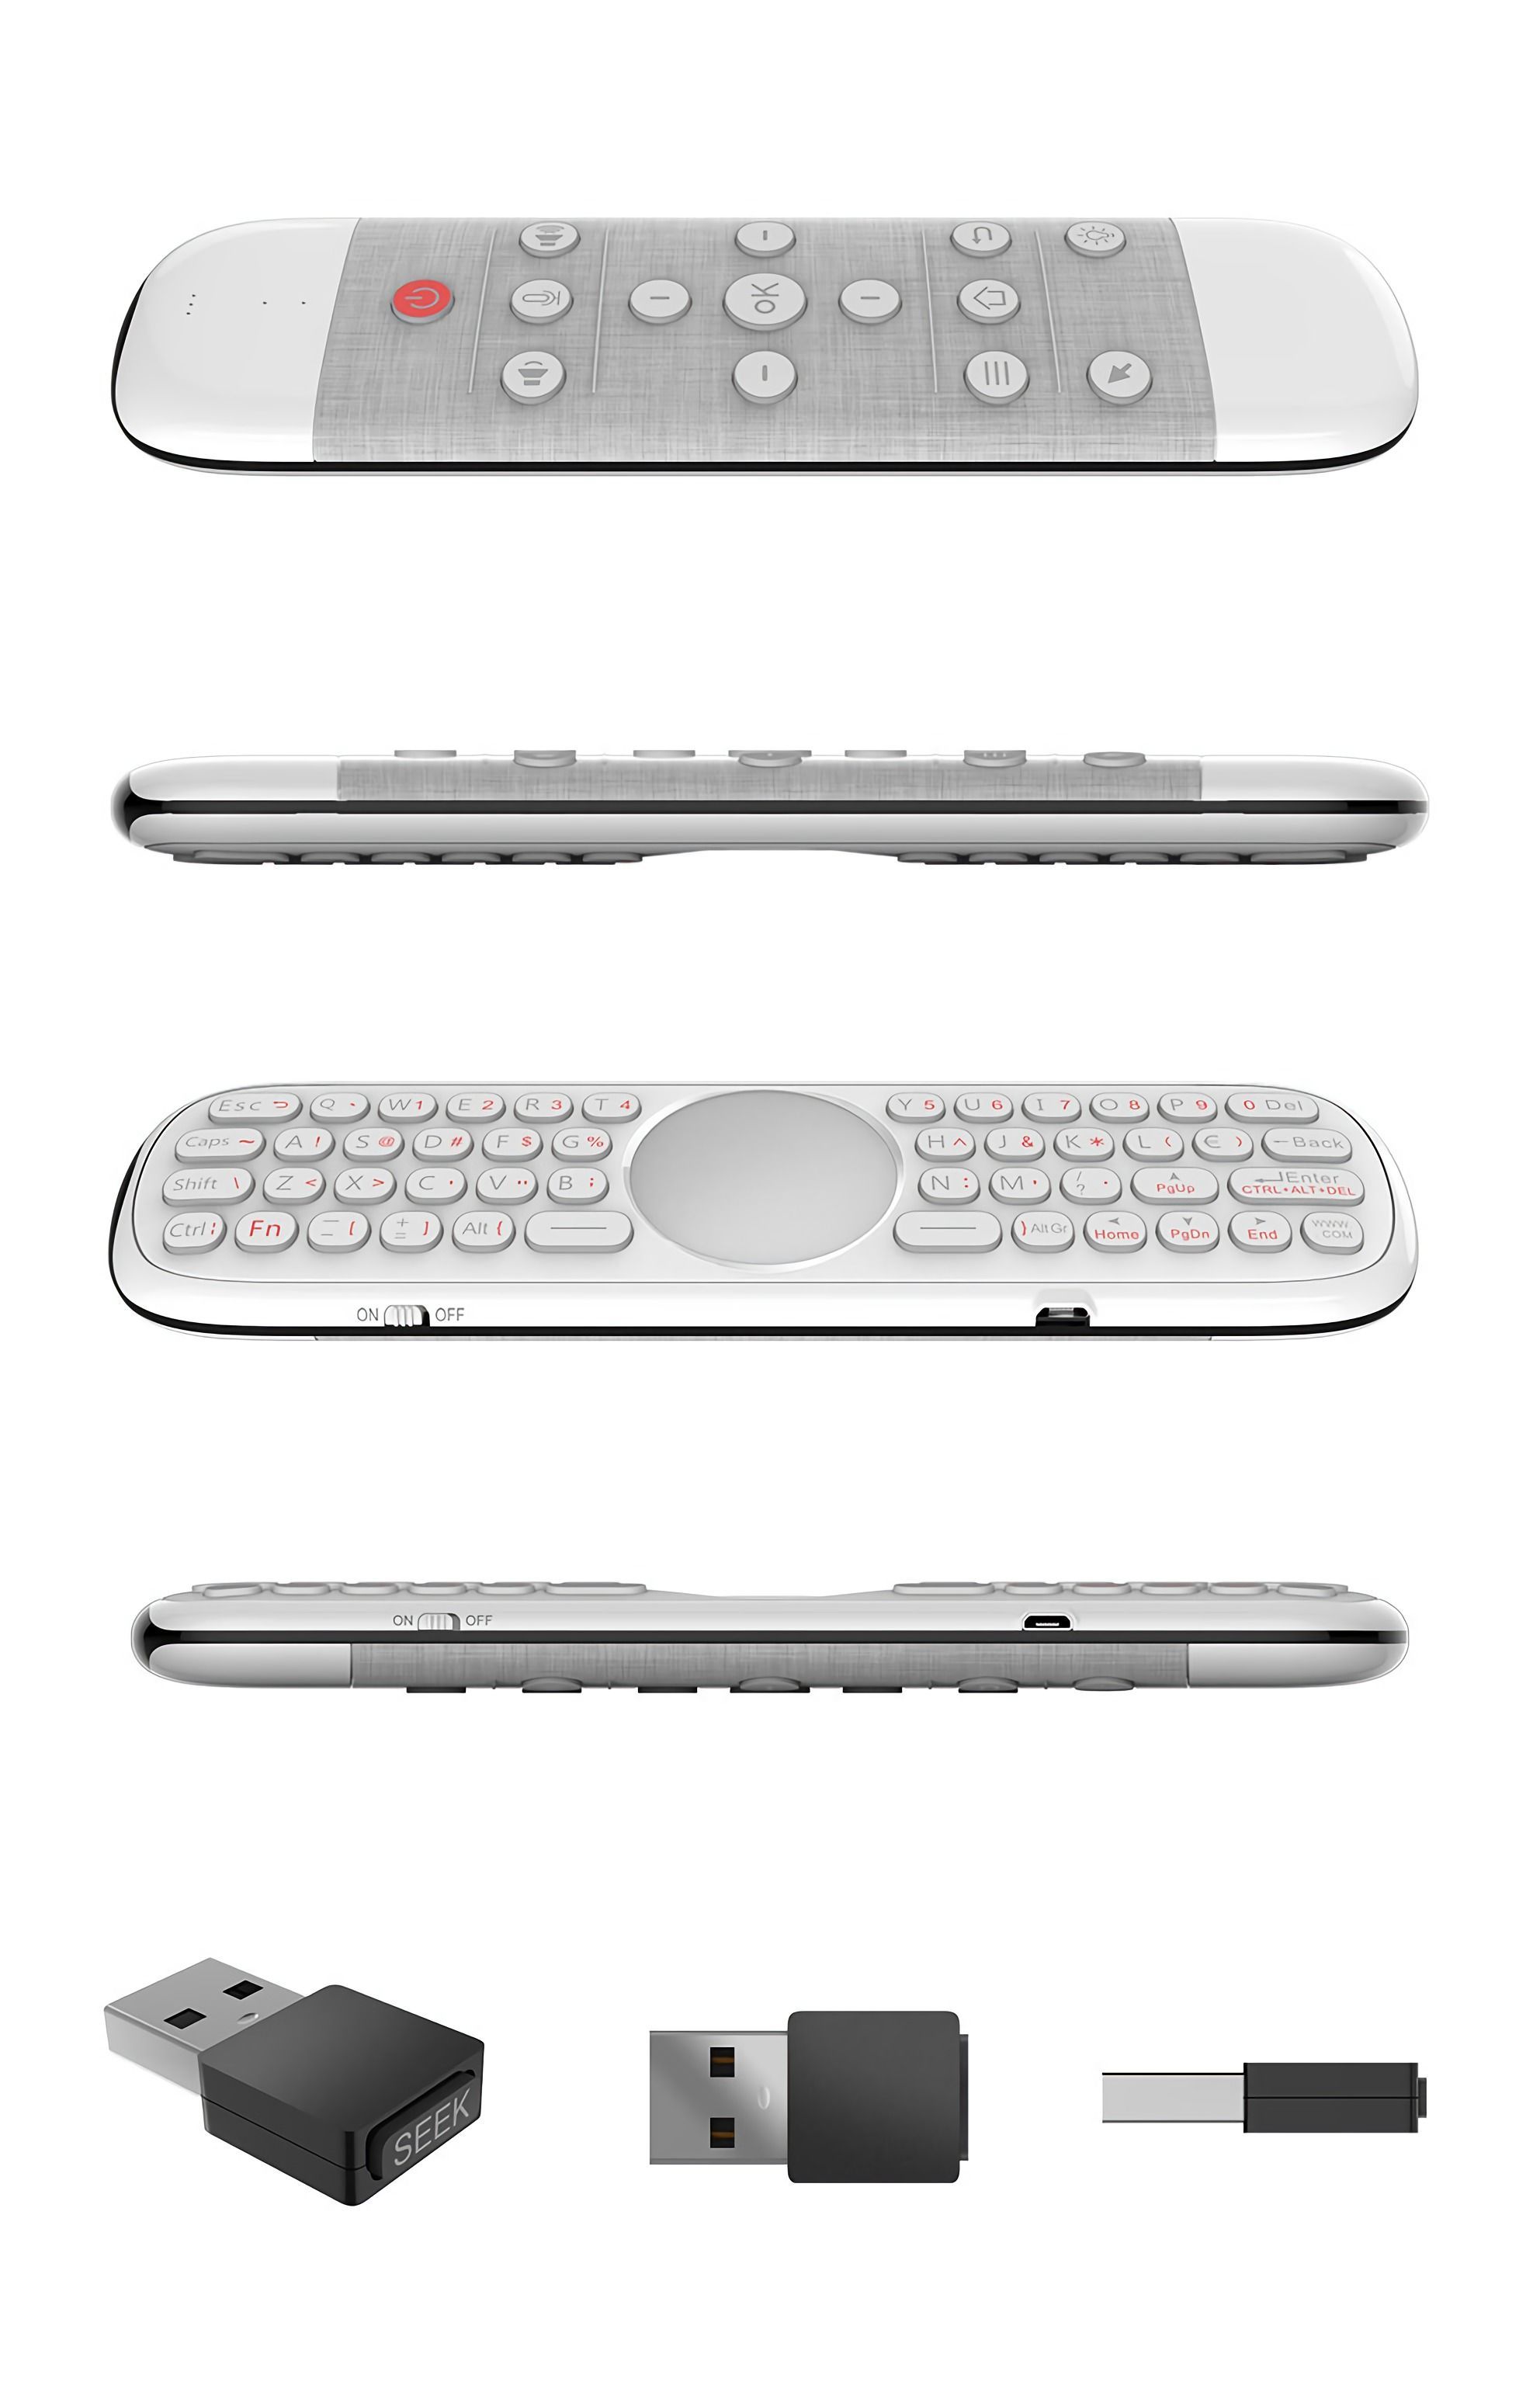 Q40-Air-Mouse-24G-6-Gyos-Vocie-Control-Air-Mouse-with-Anti-Lost-TouchPad-Remote-Control-1662849